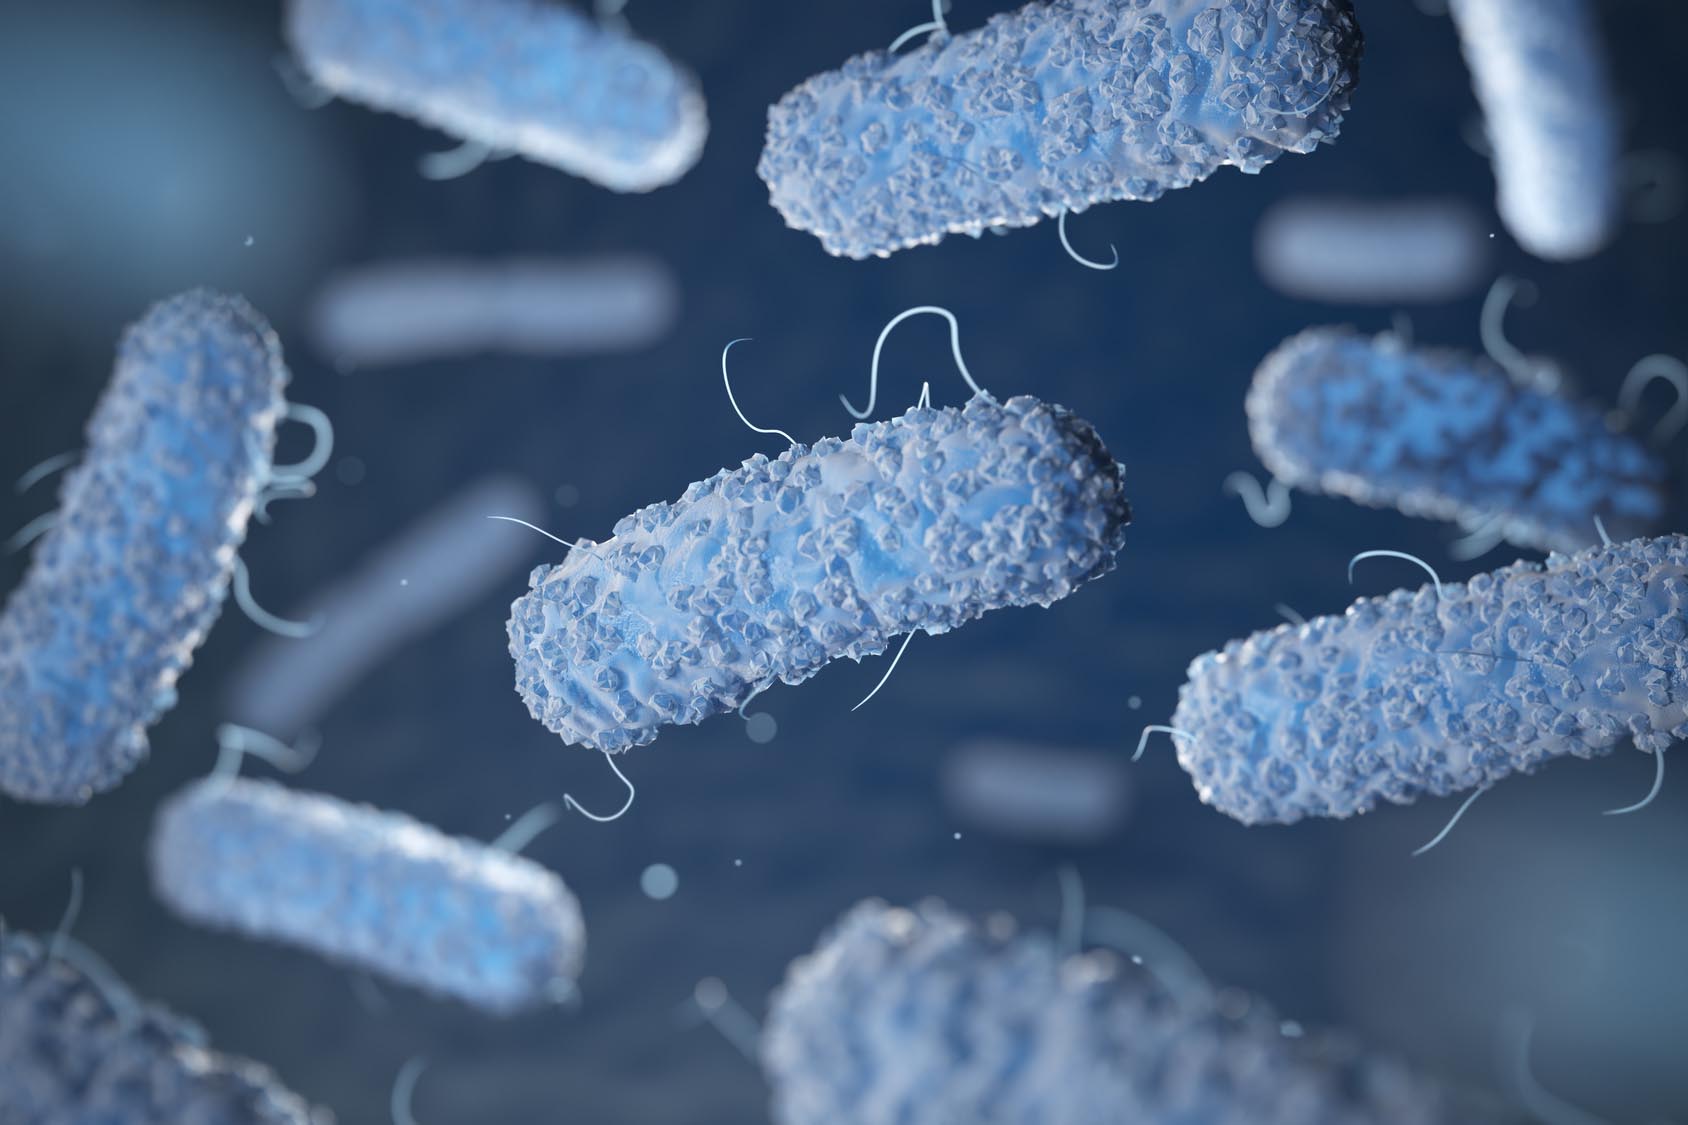 Salmonella And Candida Infections Alter Gut Microbiota Structure And Function